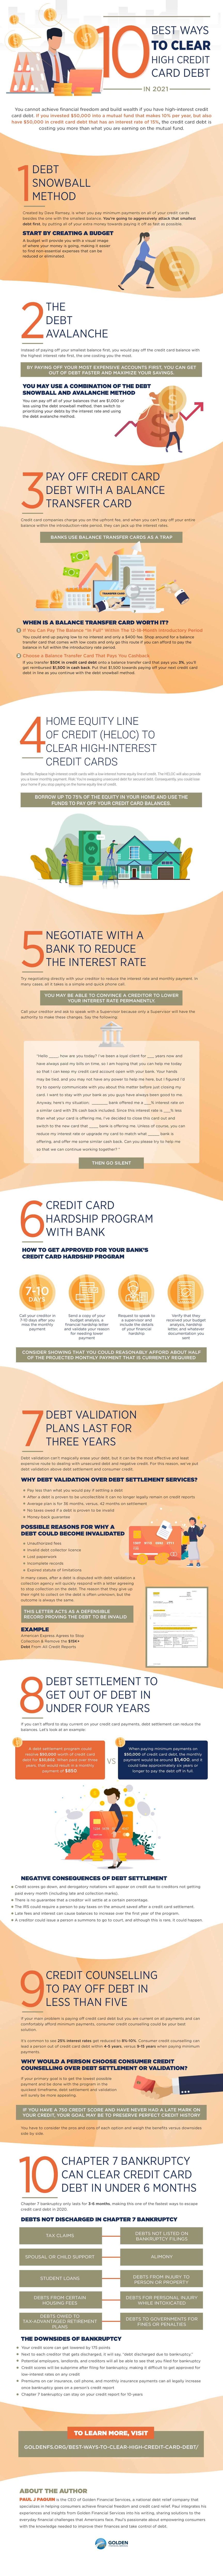 Ten Best Ways To Clear Large Credit Card Debt